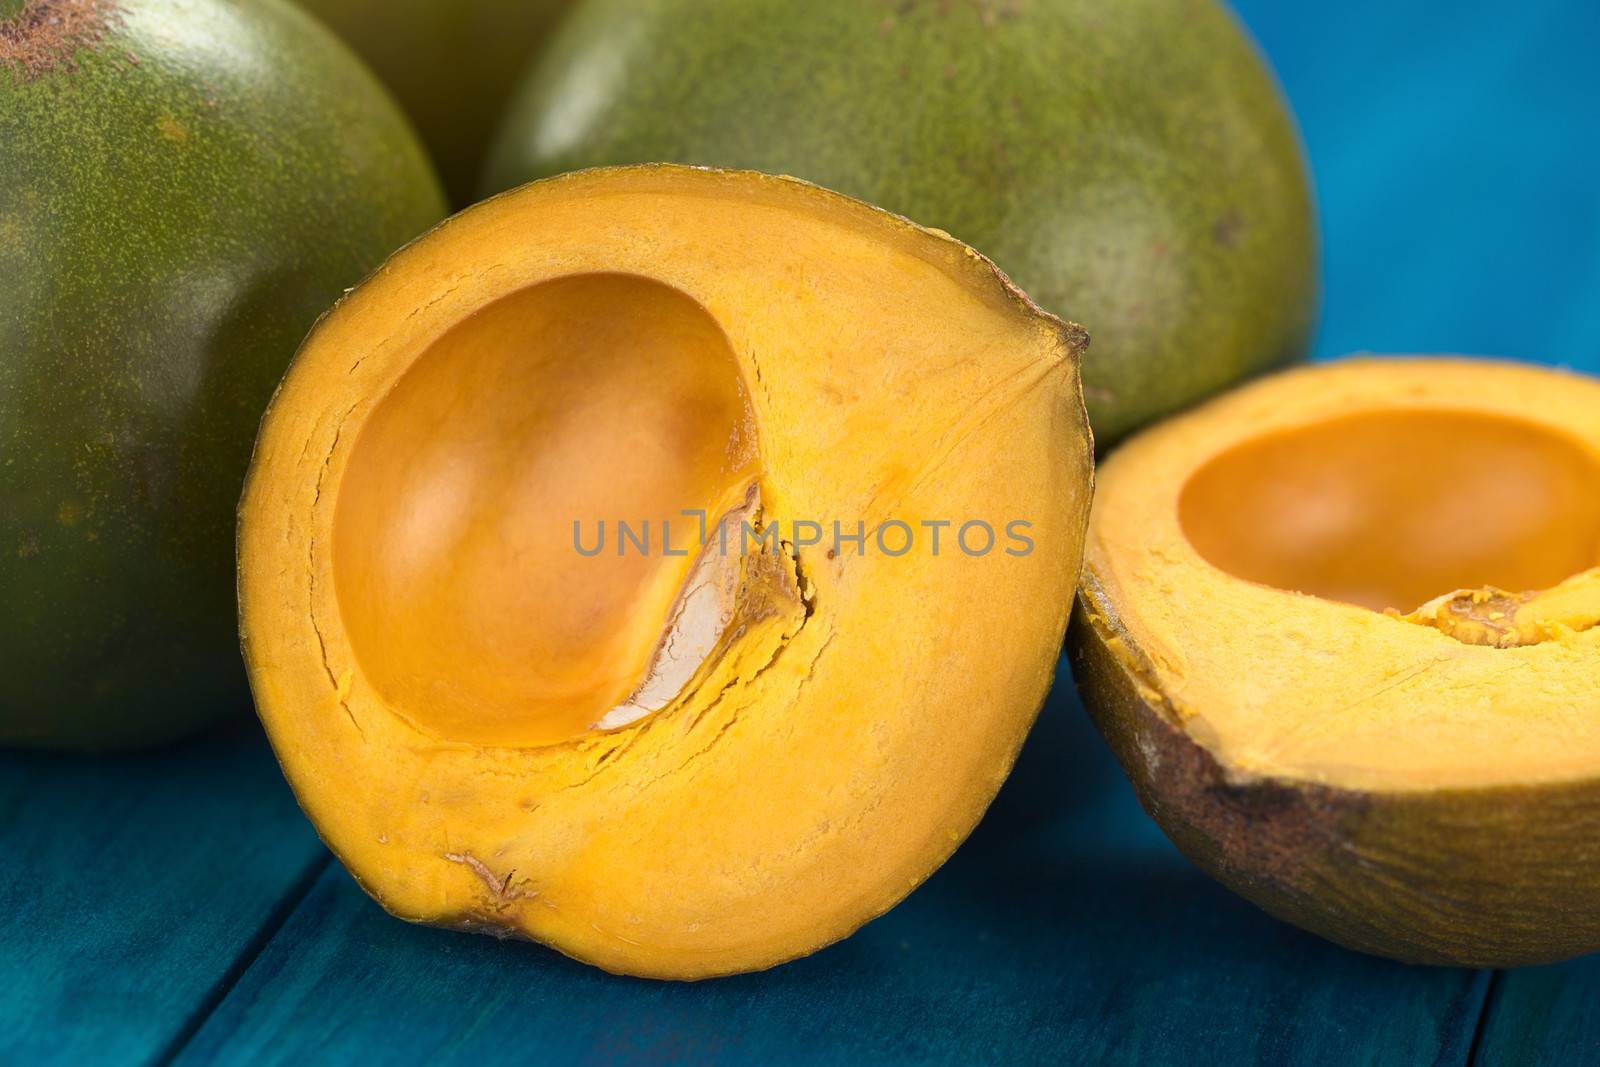 Peruvian fruit called Lucuma (lat. Pouteria lucuma) which has a dry, sweet flesh, and is mostly used to prepare juices, milkshakes, yogurts, ice cream and other desserts (Selective Focus, Focus on the standing lucuma half) 